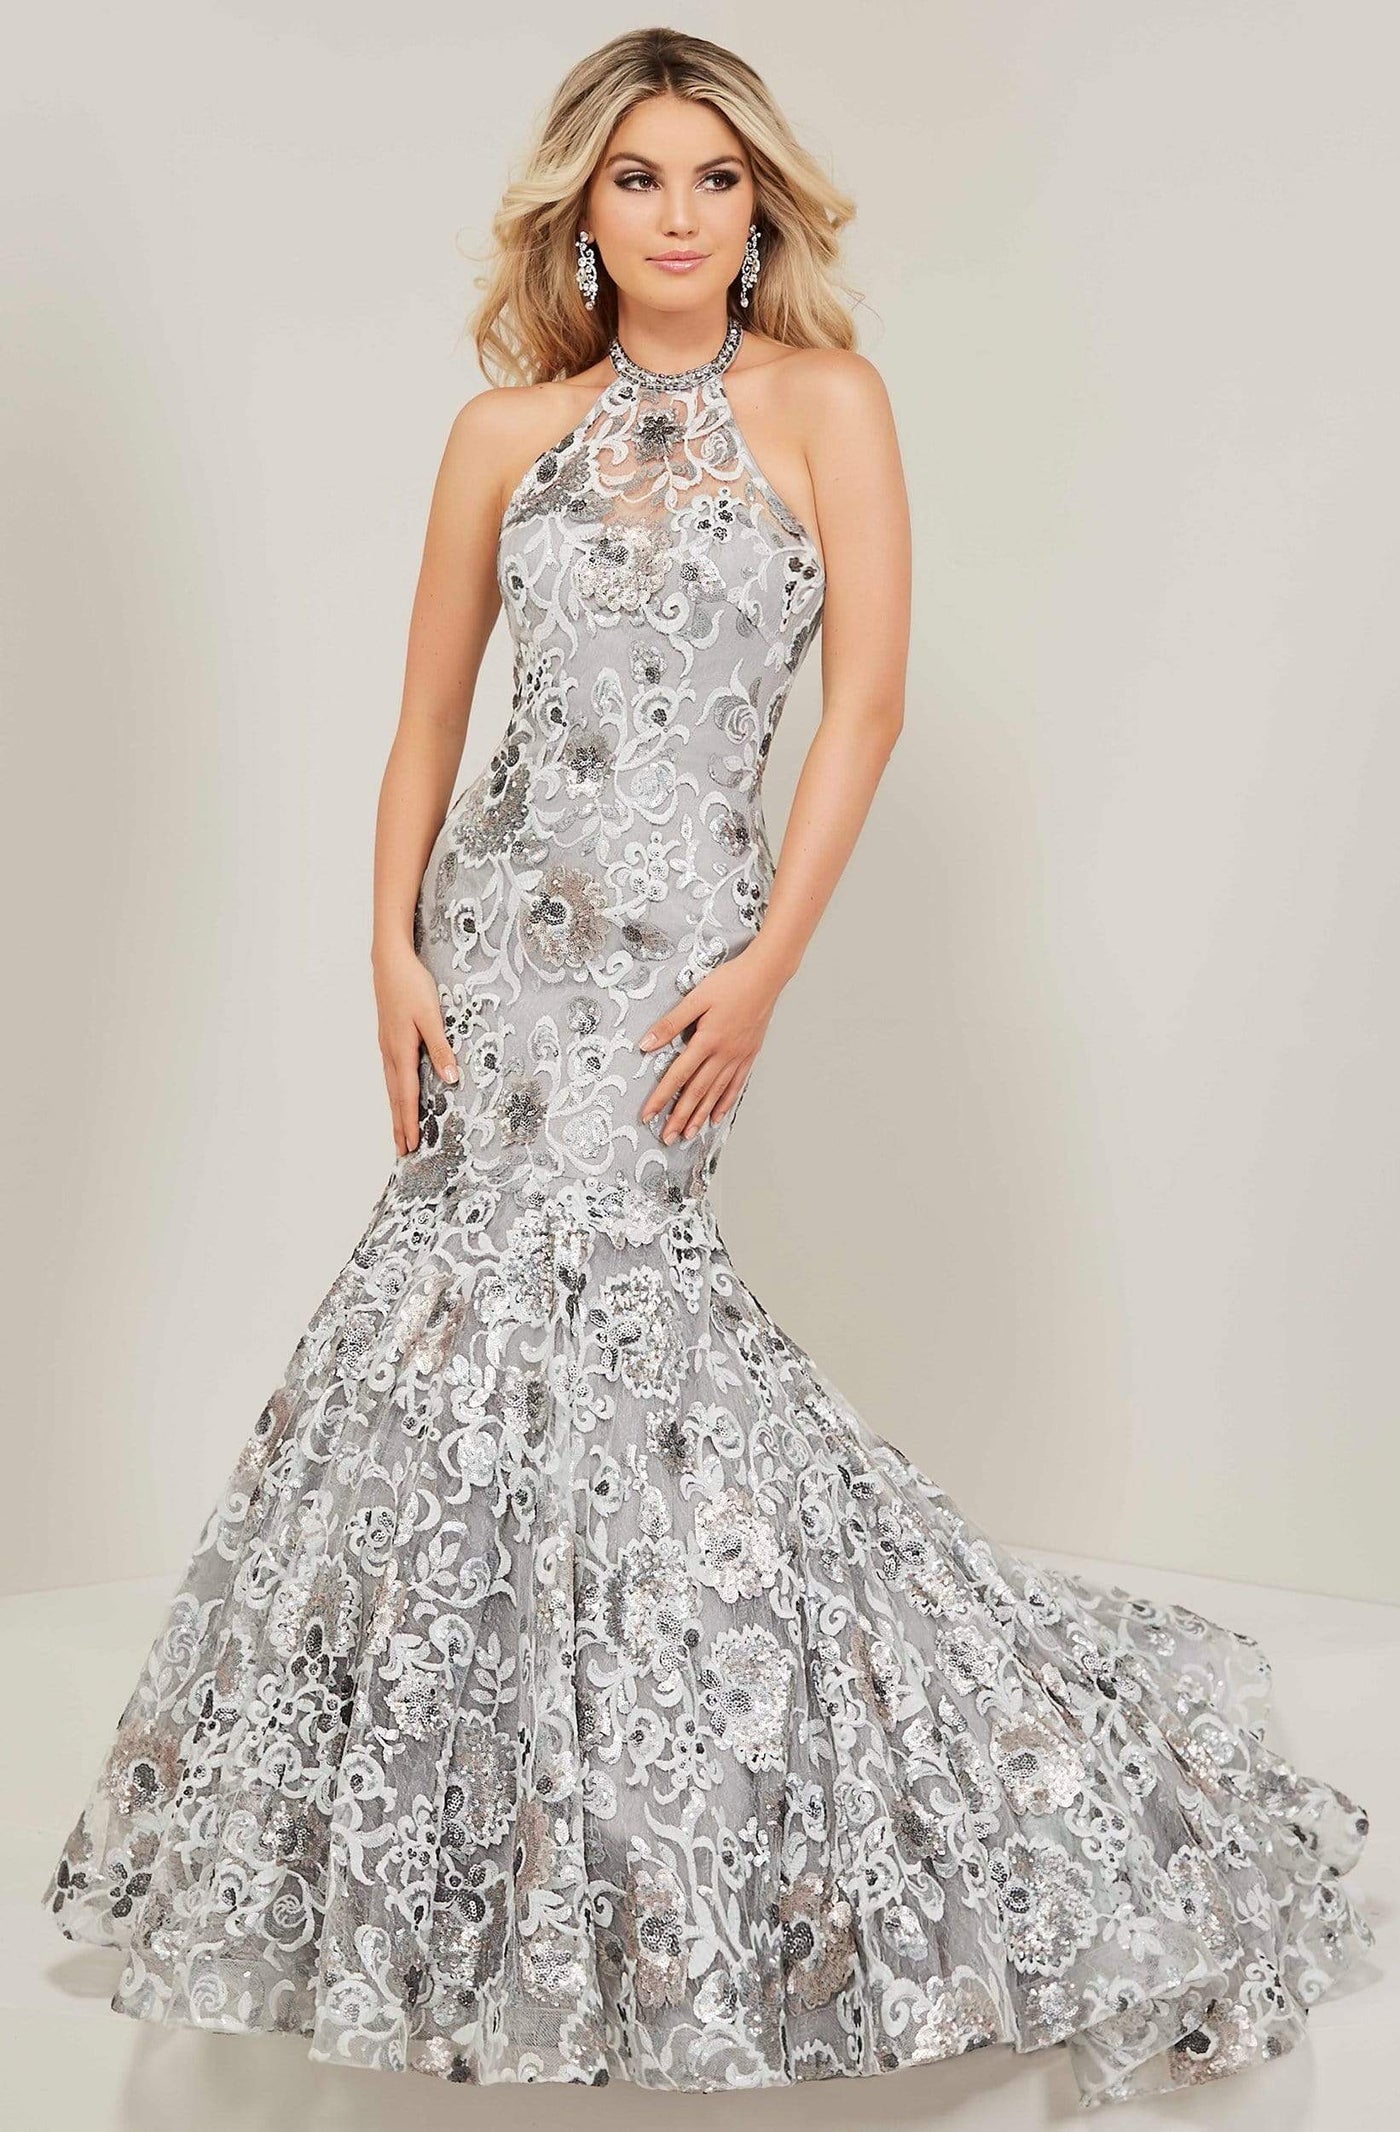 Tiffany Designs - 16366SC Sleeveless Floral Sequin Long Gown